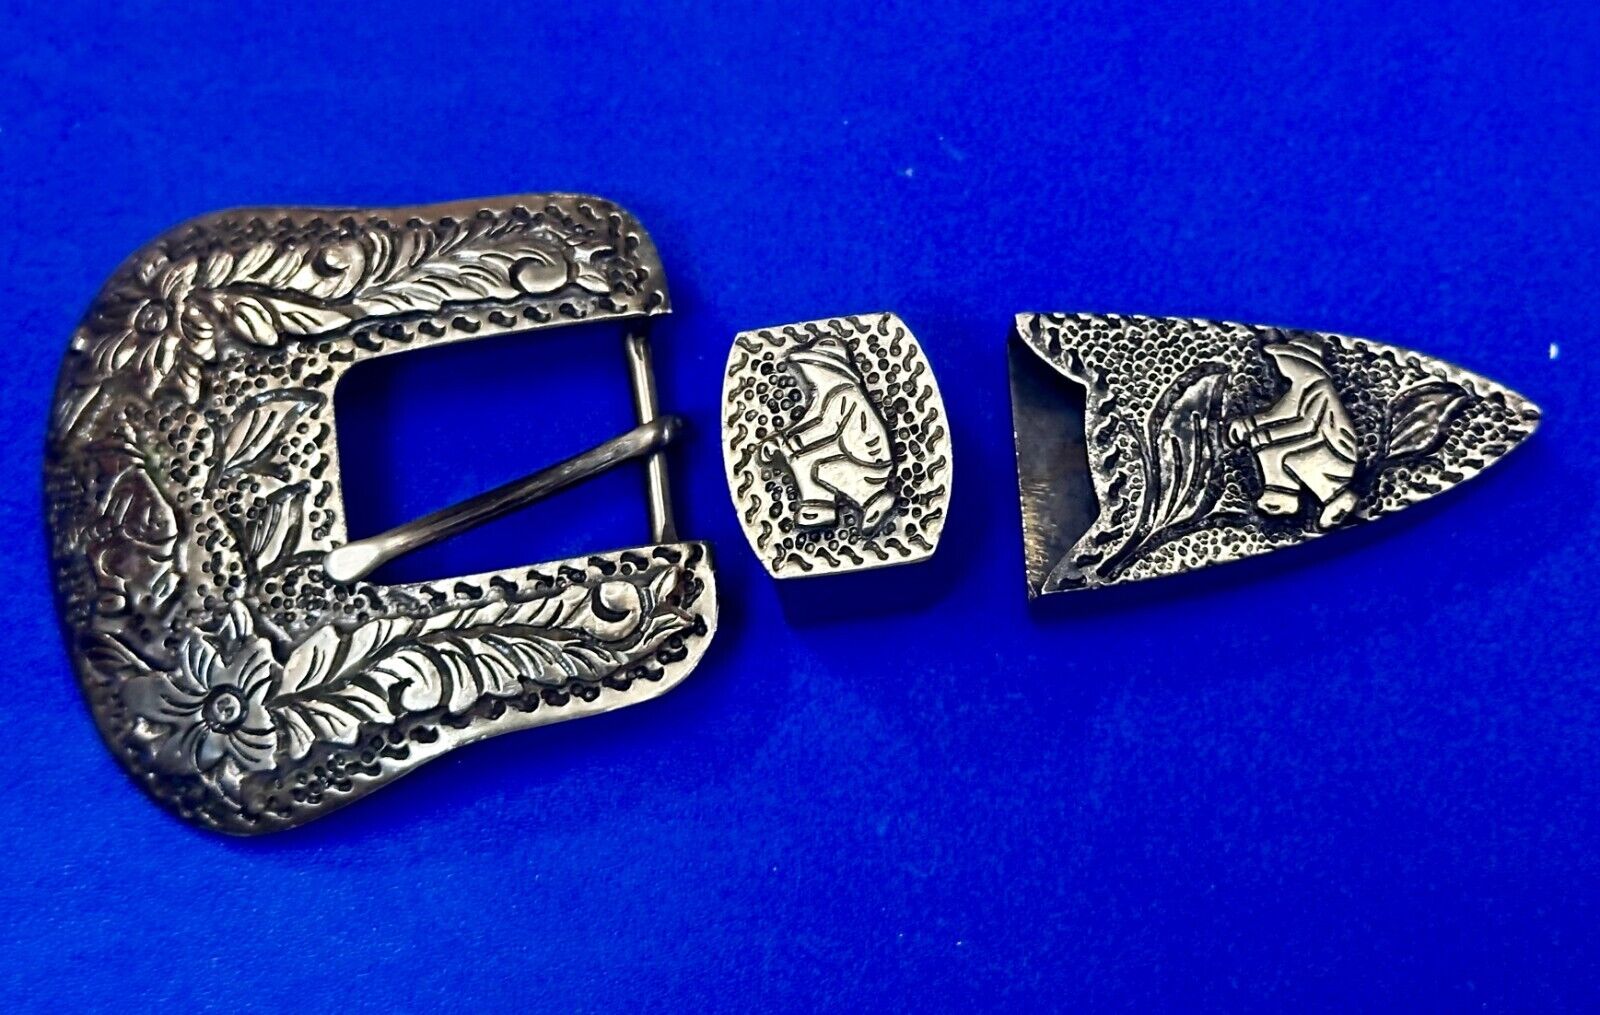 Man in Hat - 3 Piece Ornate Mexico Made / Style / Theme Belt Buckle